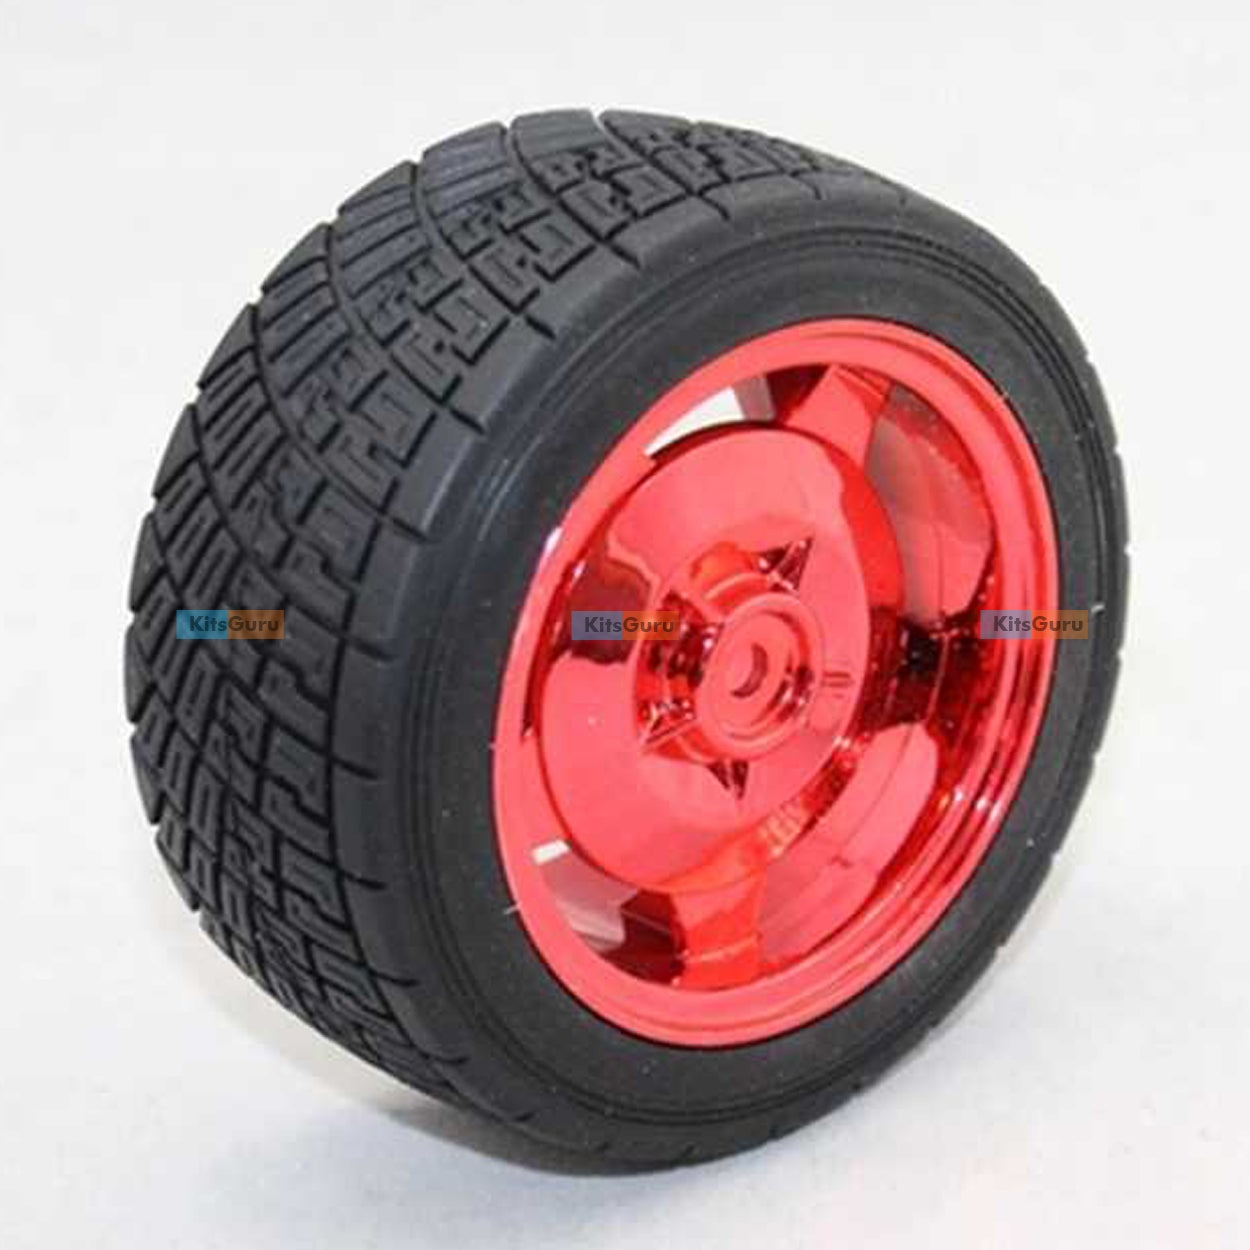 83MM Export Quality Large Robot Smart Car Wheel, 35MM Width Surface Red Colour